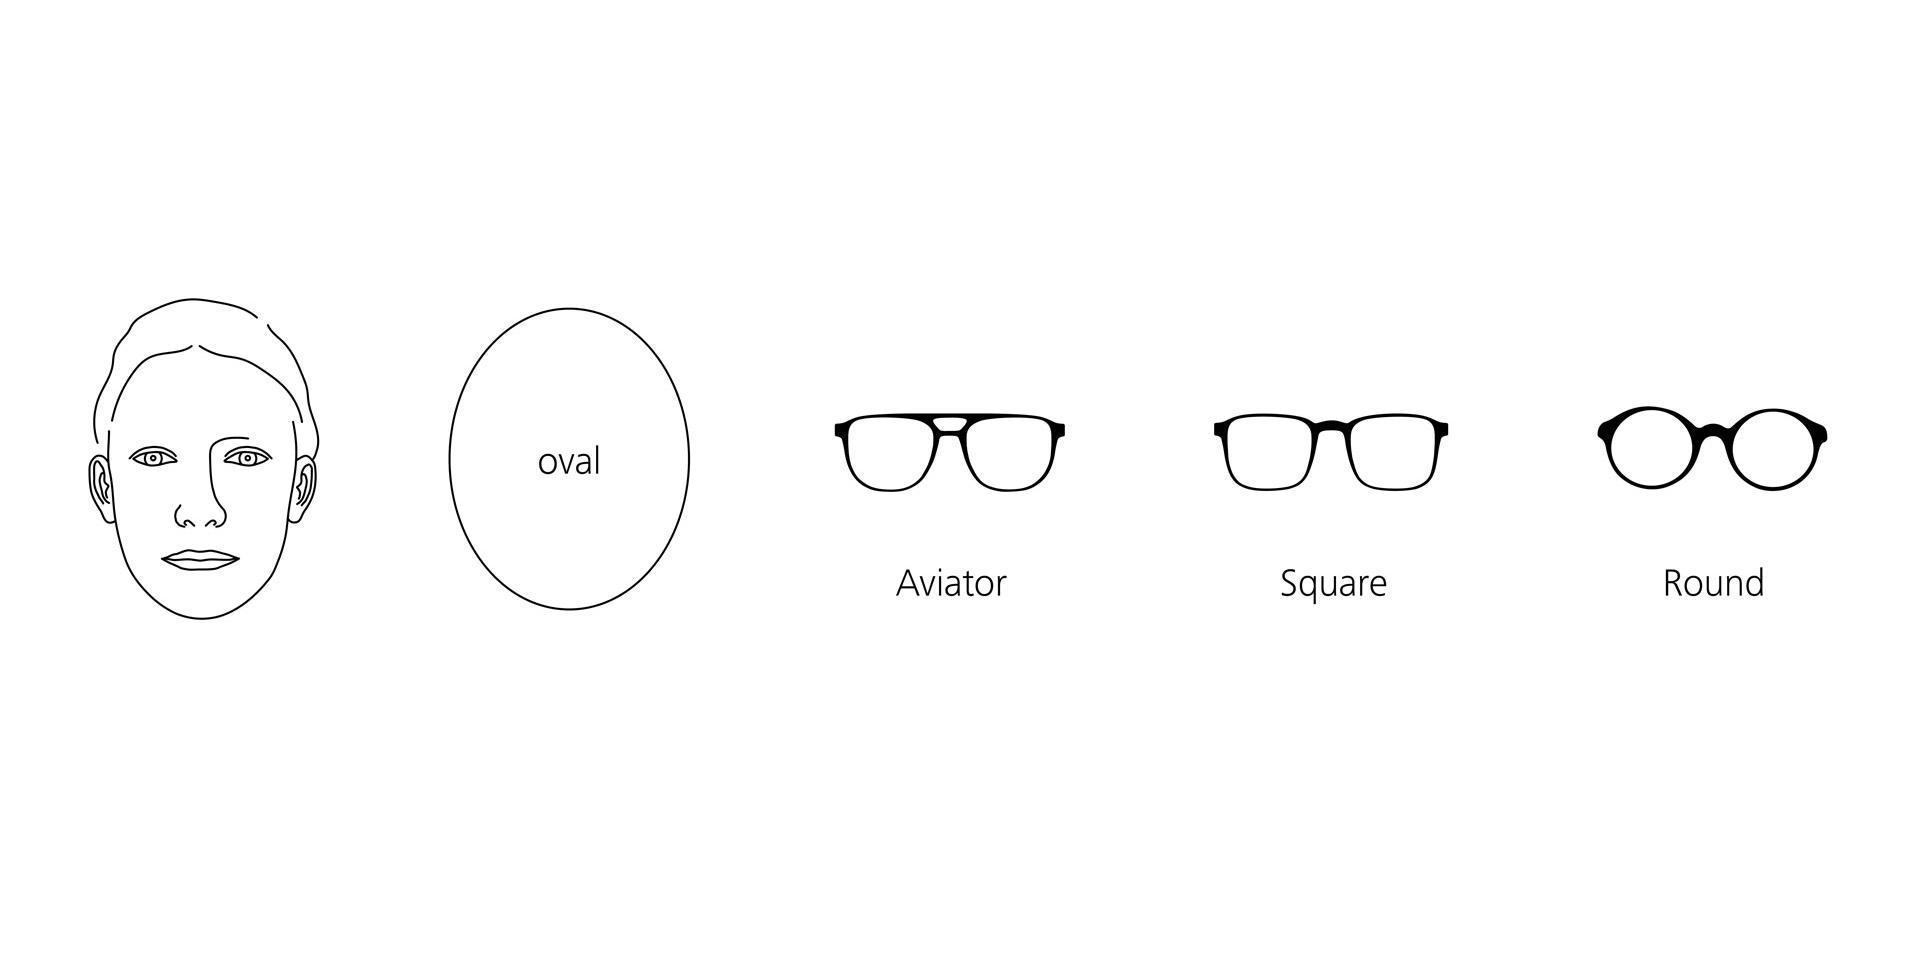 Graphic showing a face with oval shape and matching eyeglass frames.